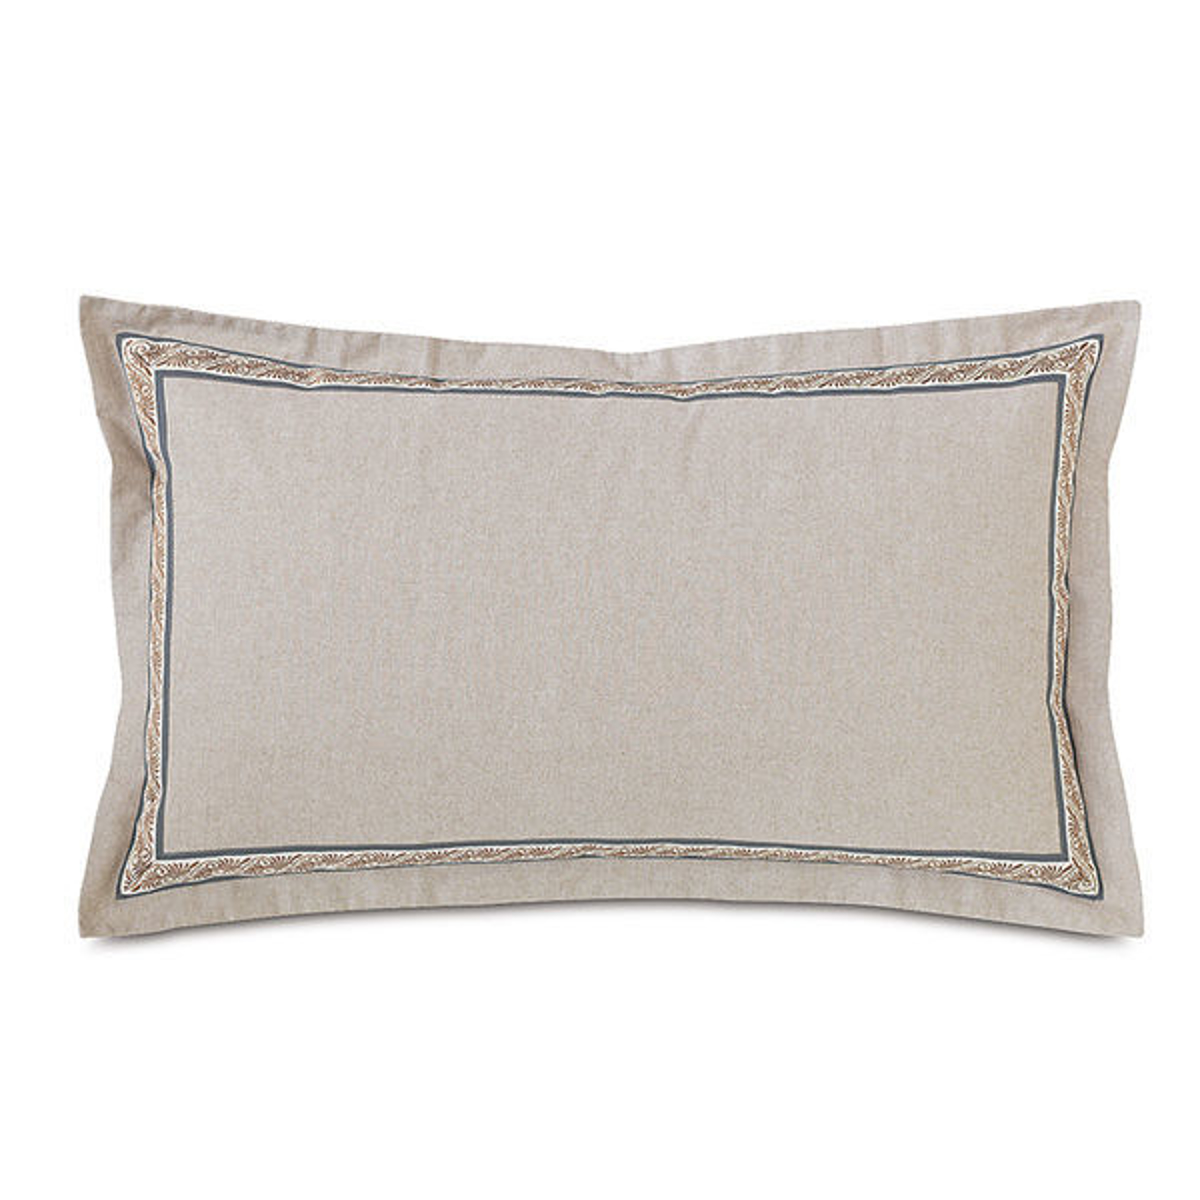 Picture of EDITH KING PILLOW INSERT